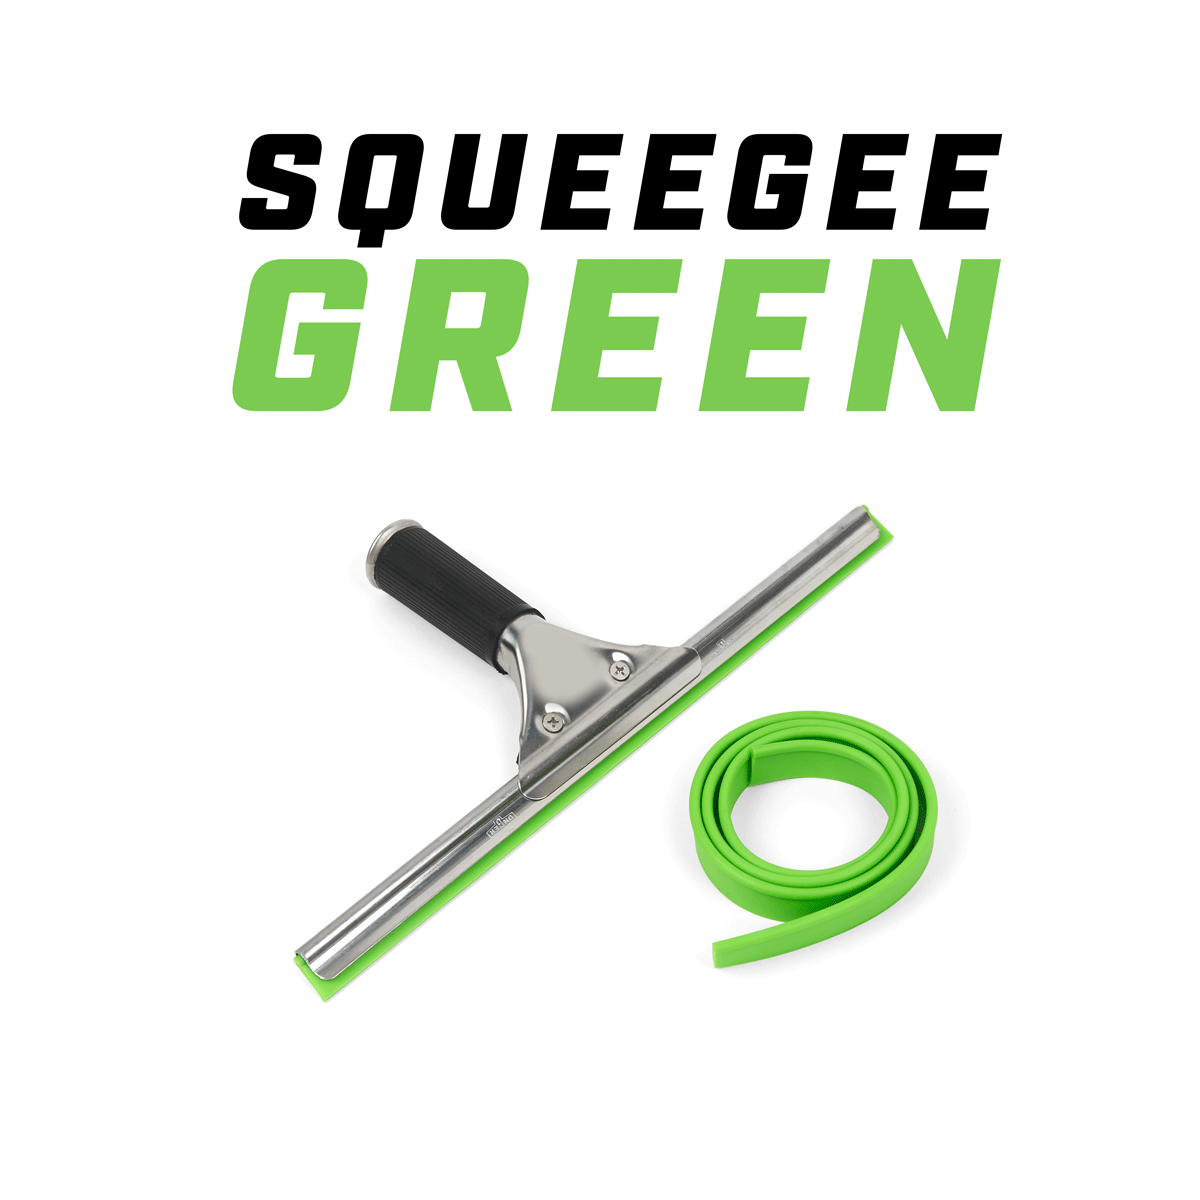 Squeegee for Window Cleaning.Window Squeegee with 2 UAE